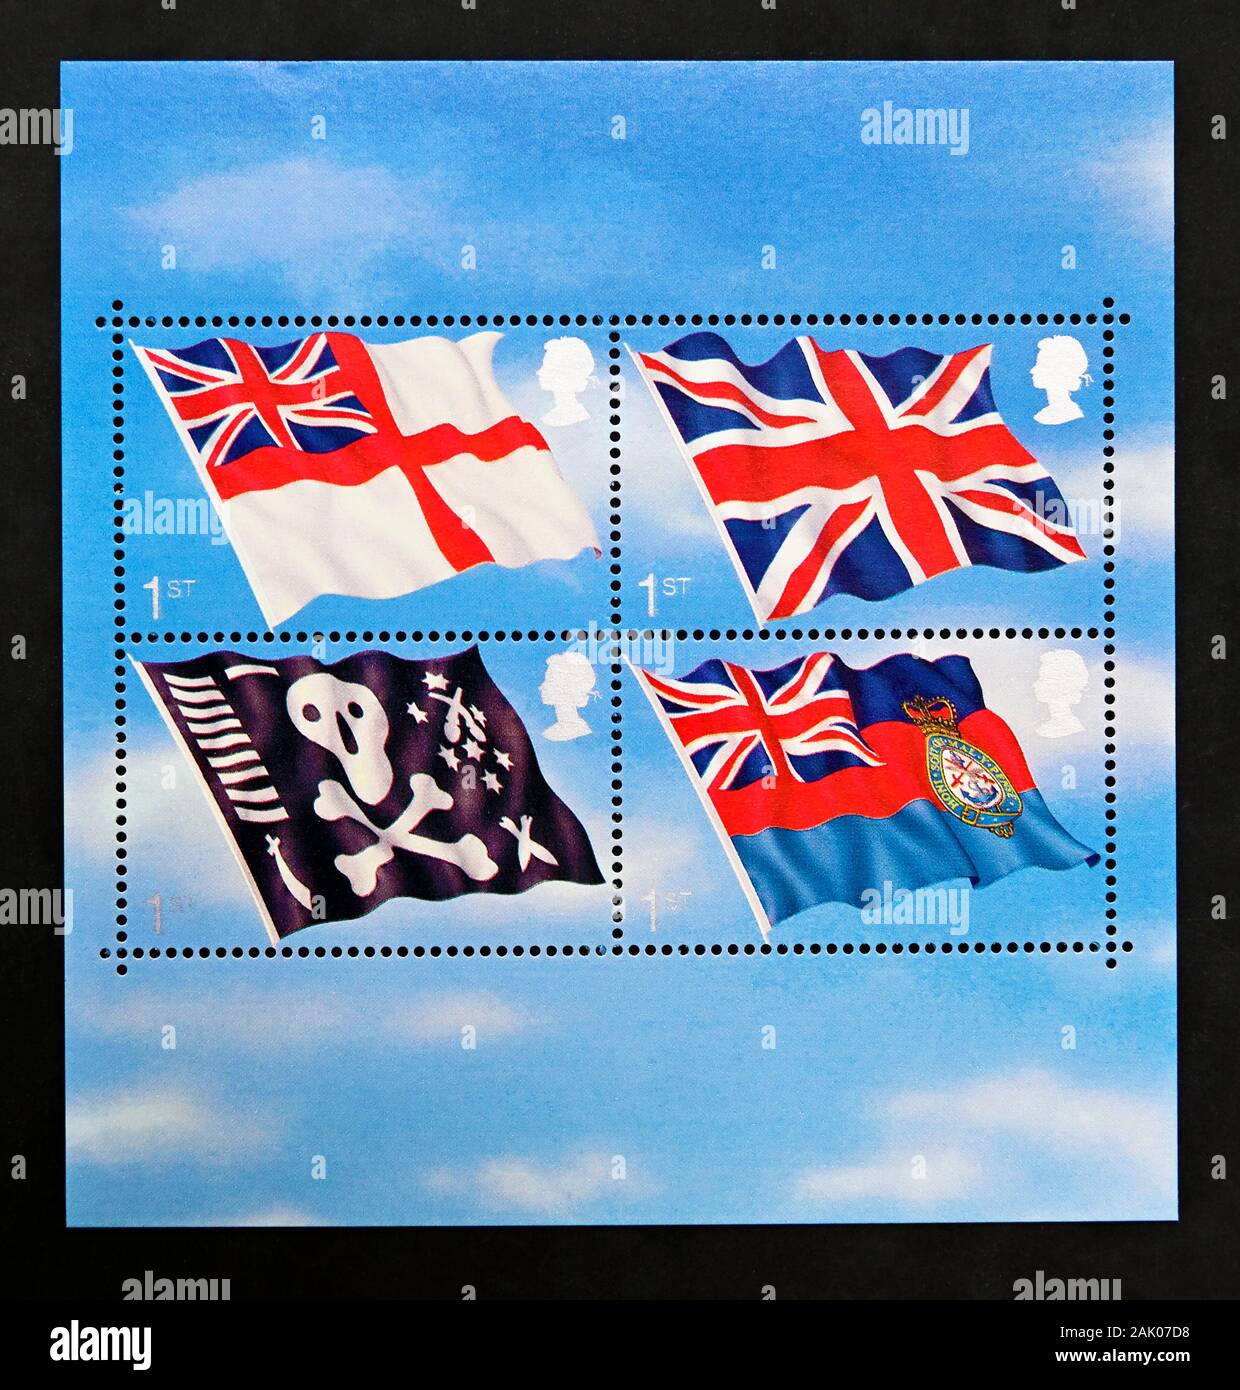 Postage stamps. Miniature sheet. Great Britain. Queen Elizabeth II. Centenary of Royal Navy Submarine Service. 4 x 1st. class. 2001. Stock Photo